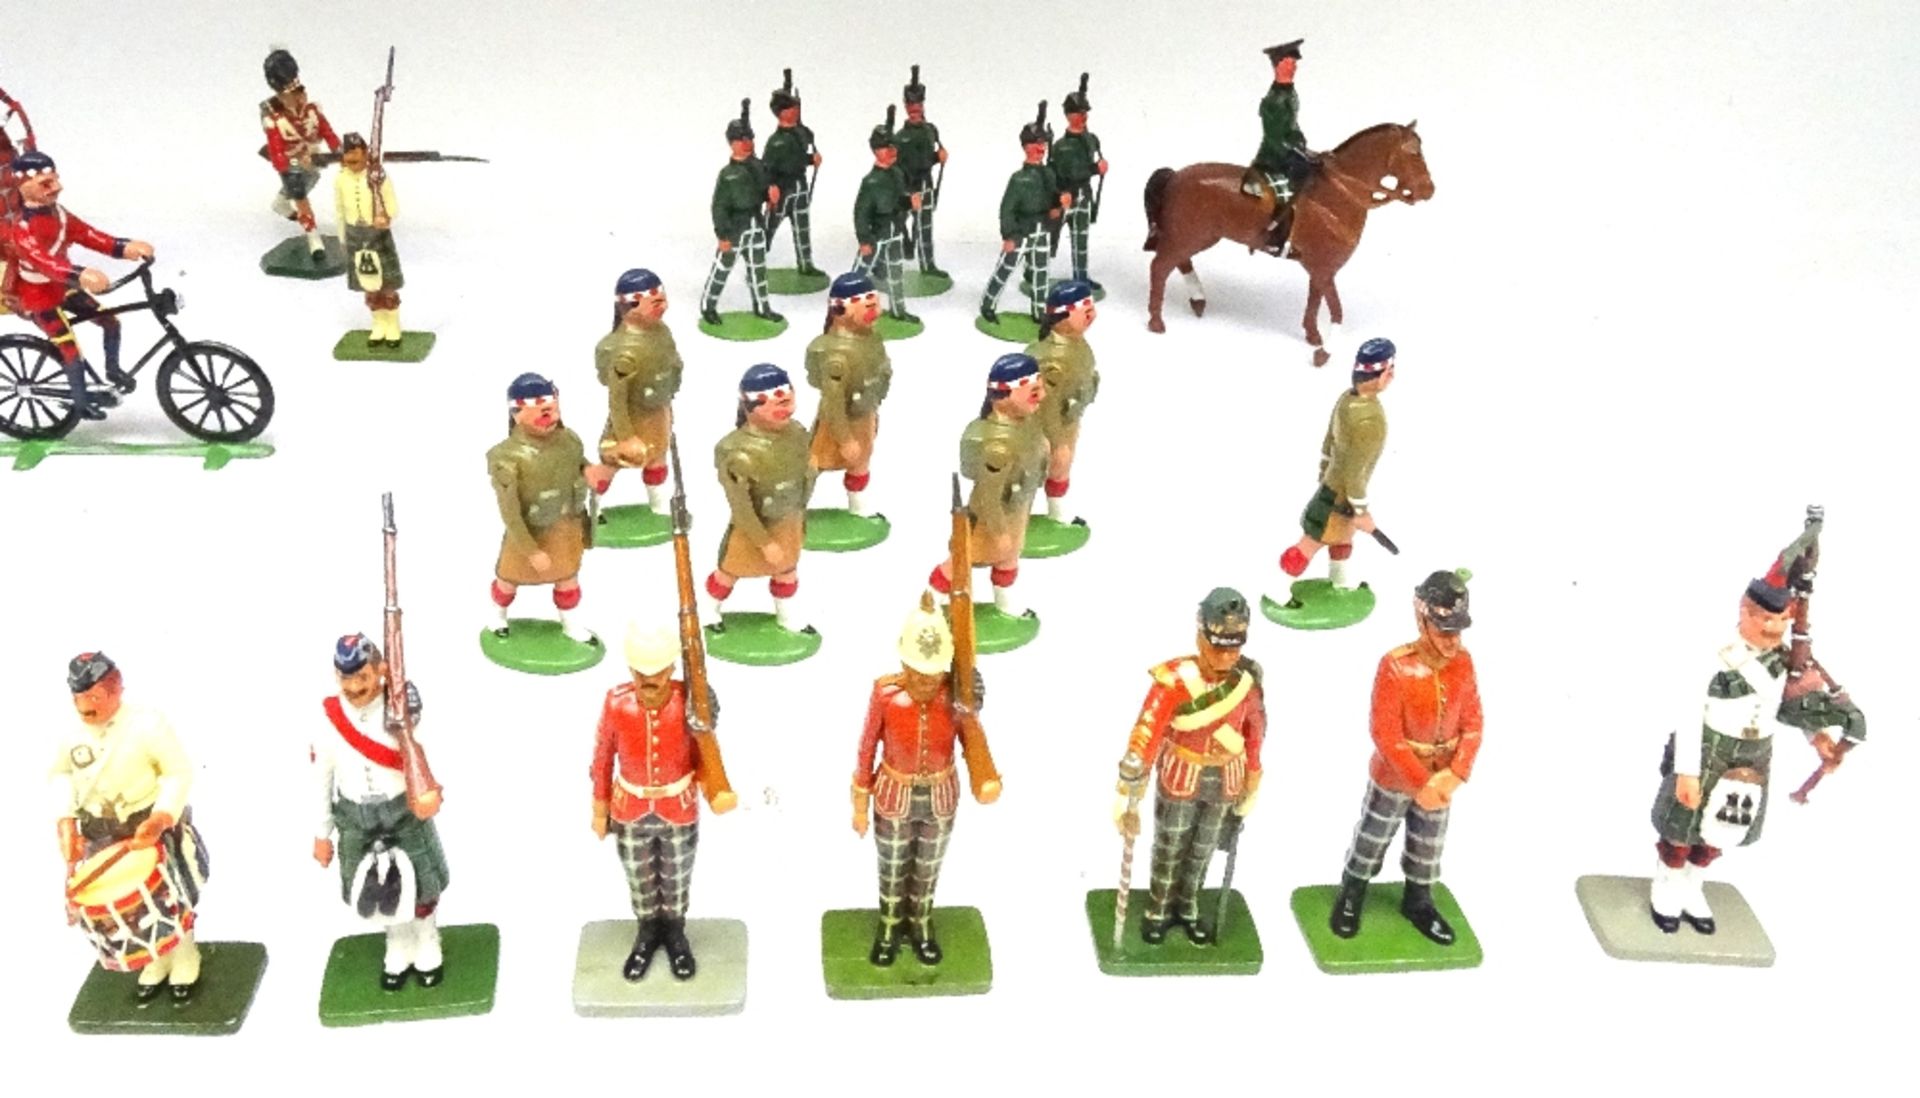 Highlander New Toy Soldiers - Image 5 of 7